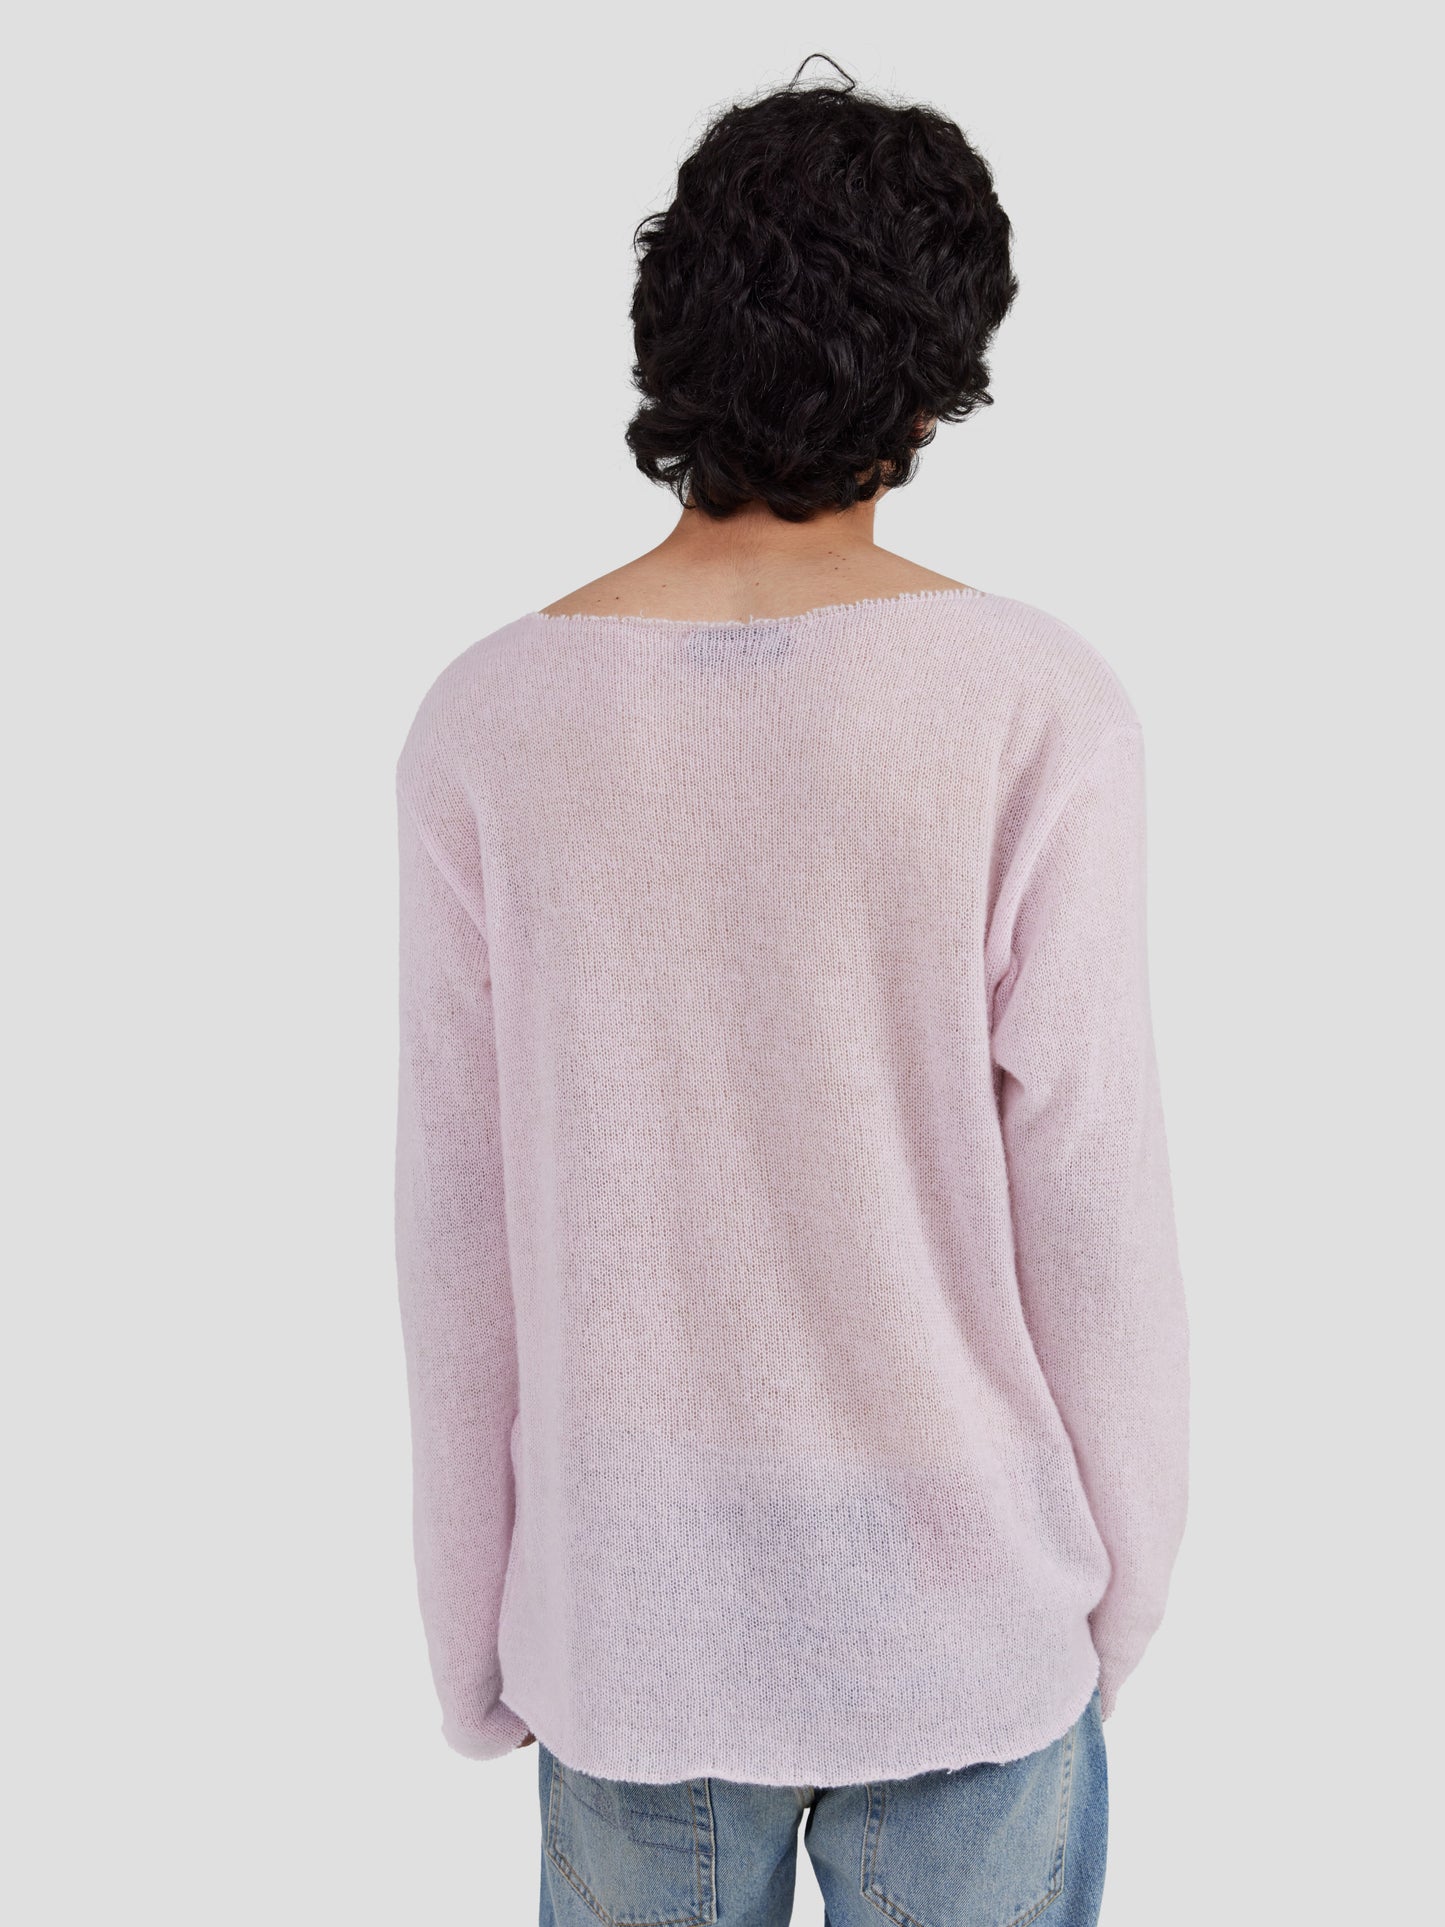 Long Sleeve T-Shirt in Pink